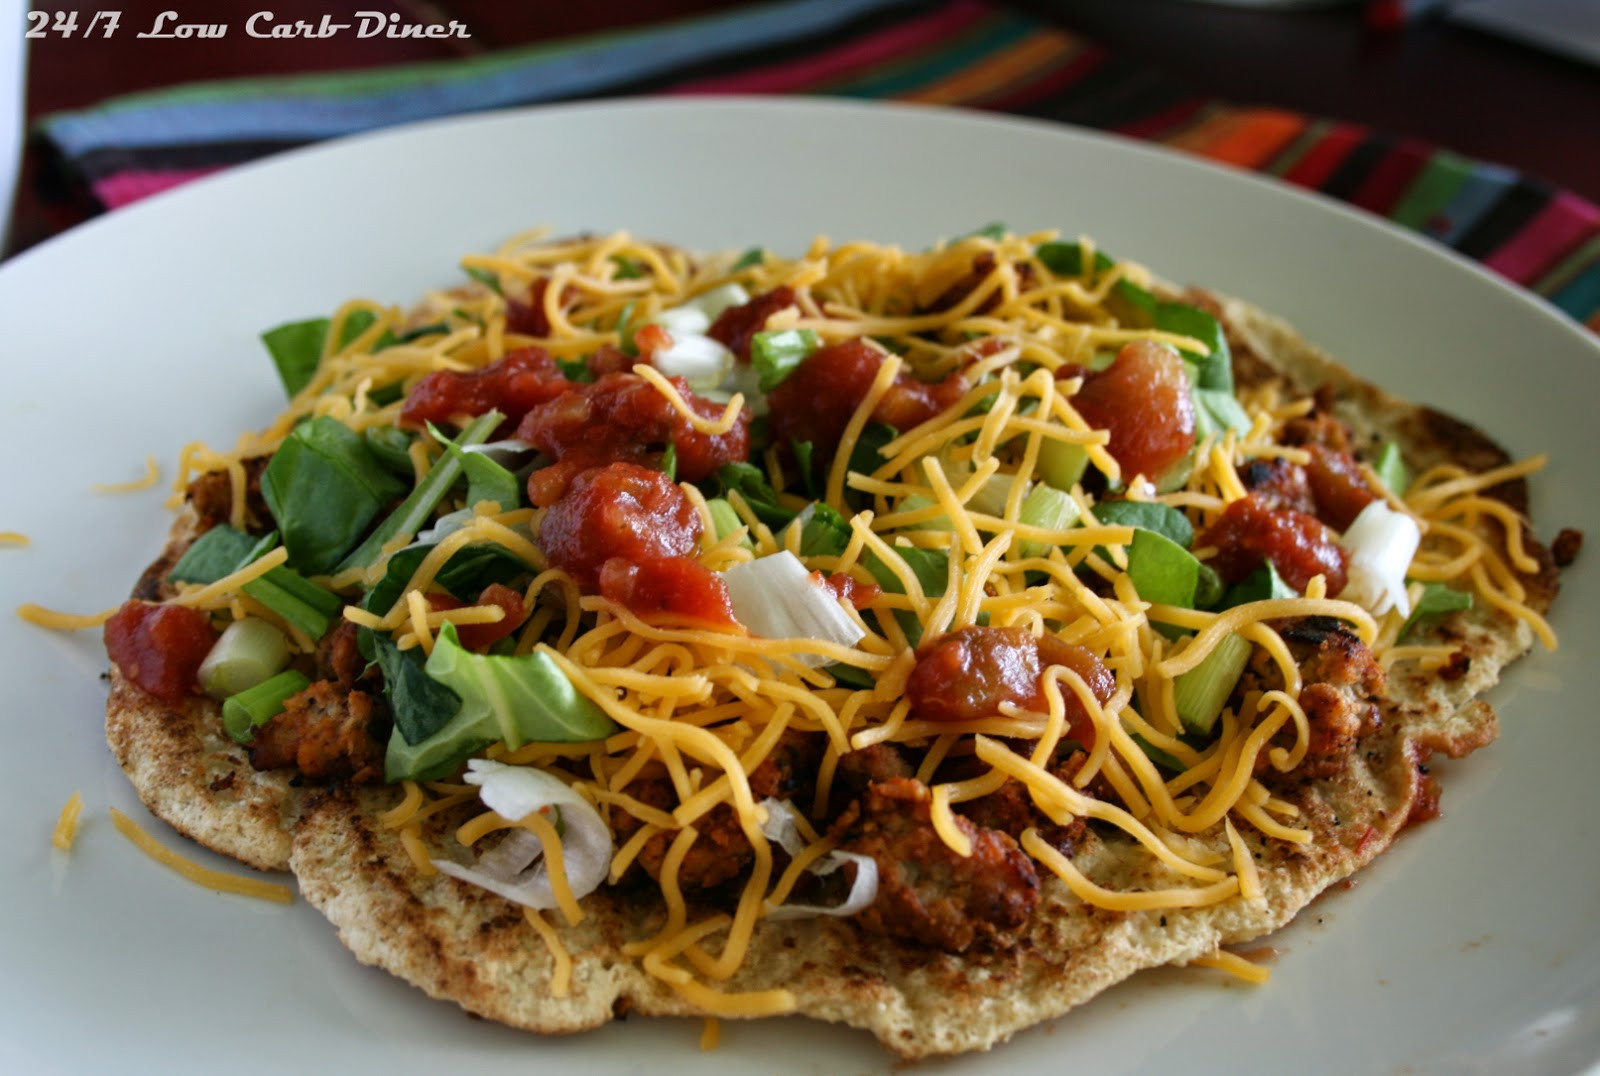 Indian Fry Bread Taco
 24 7 Low Carb Diner Indian Fry Bread Tacos